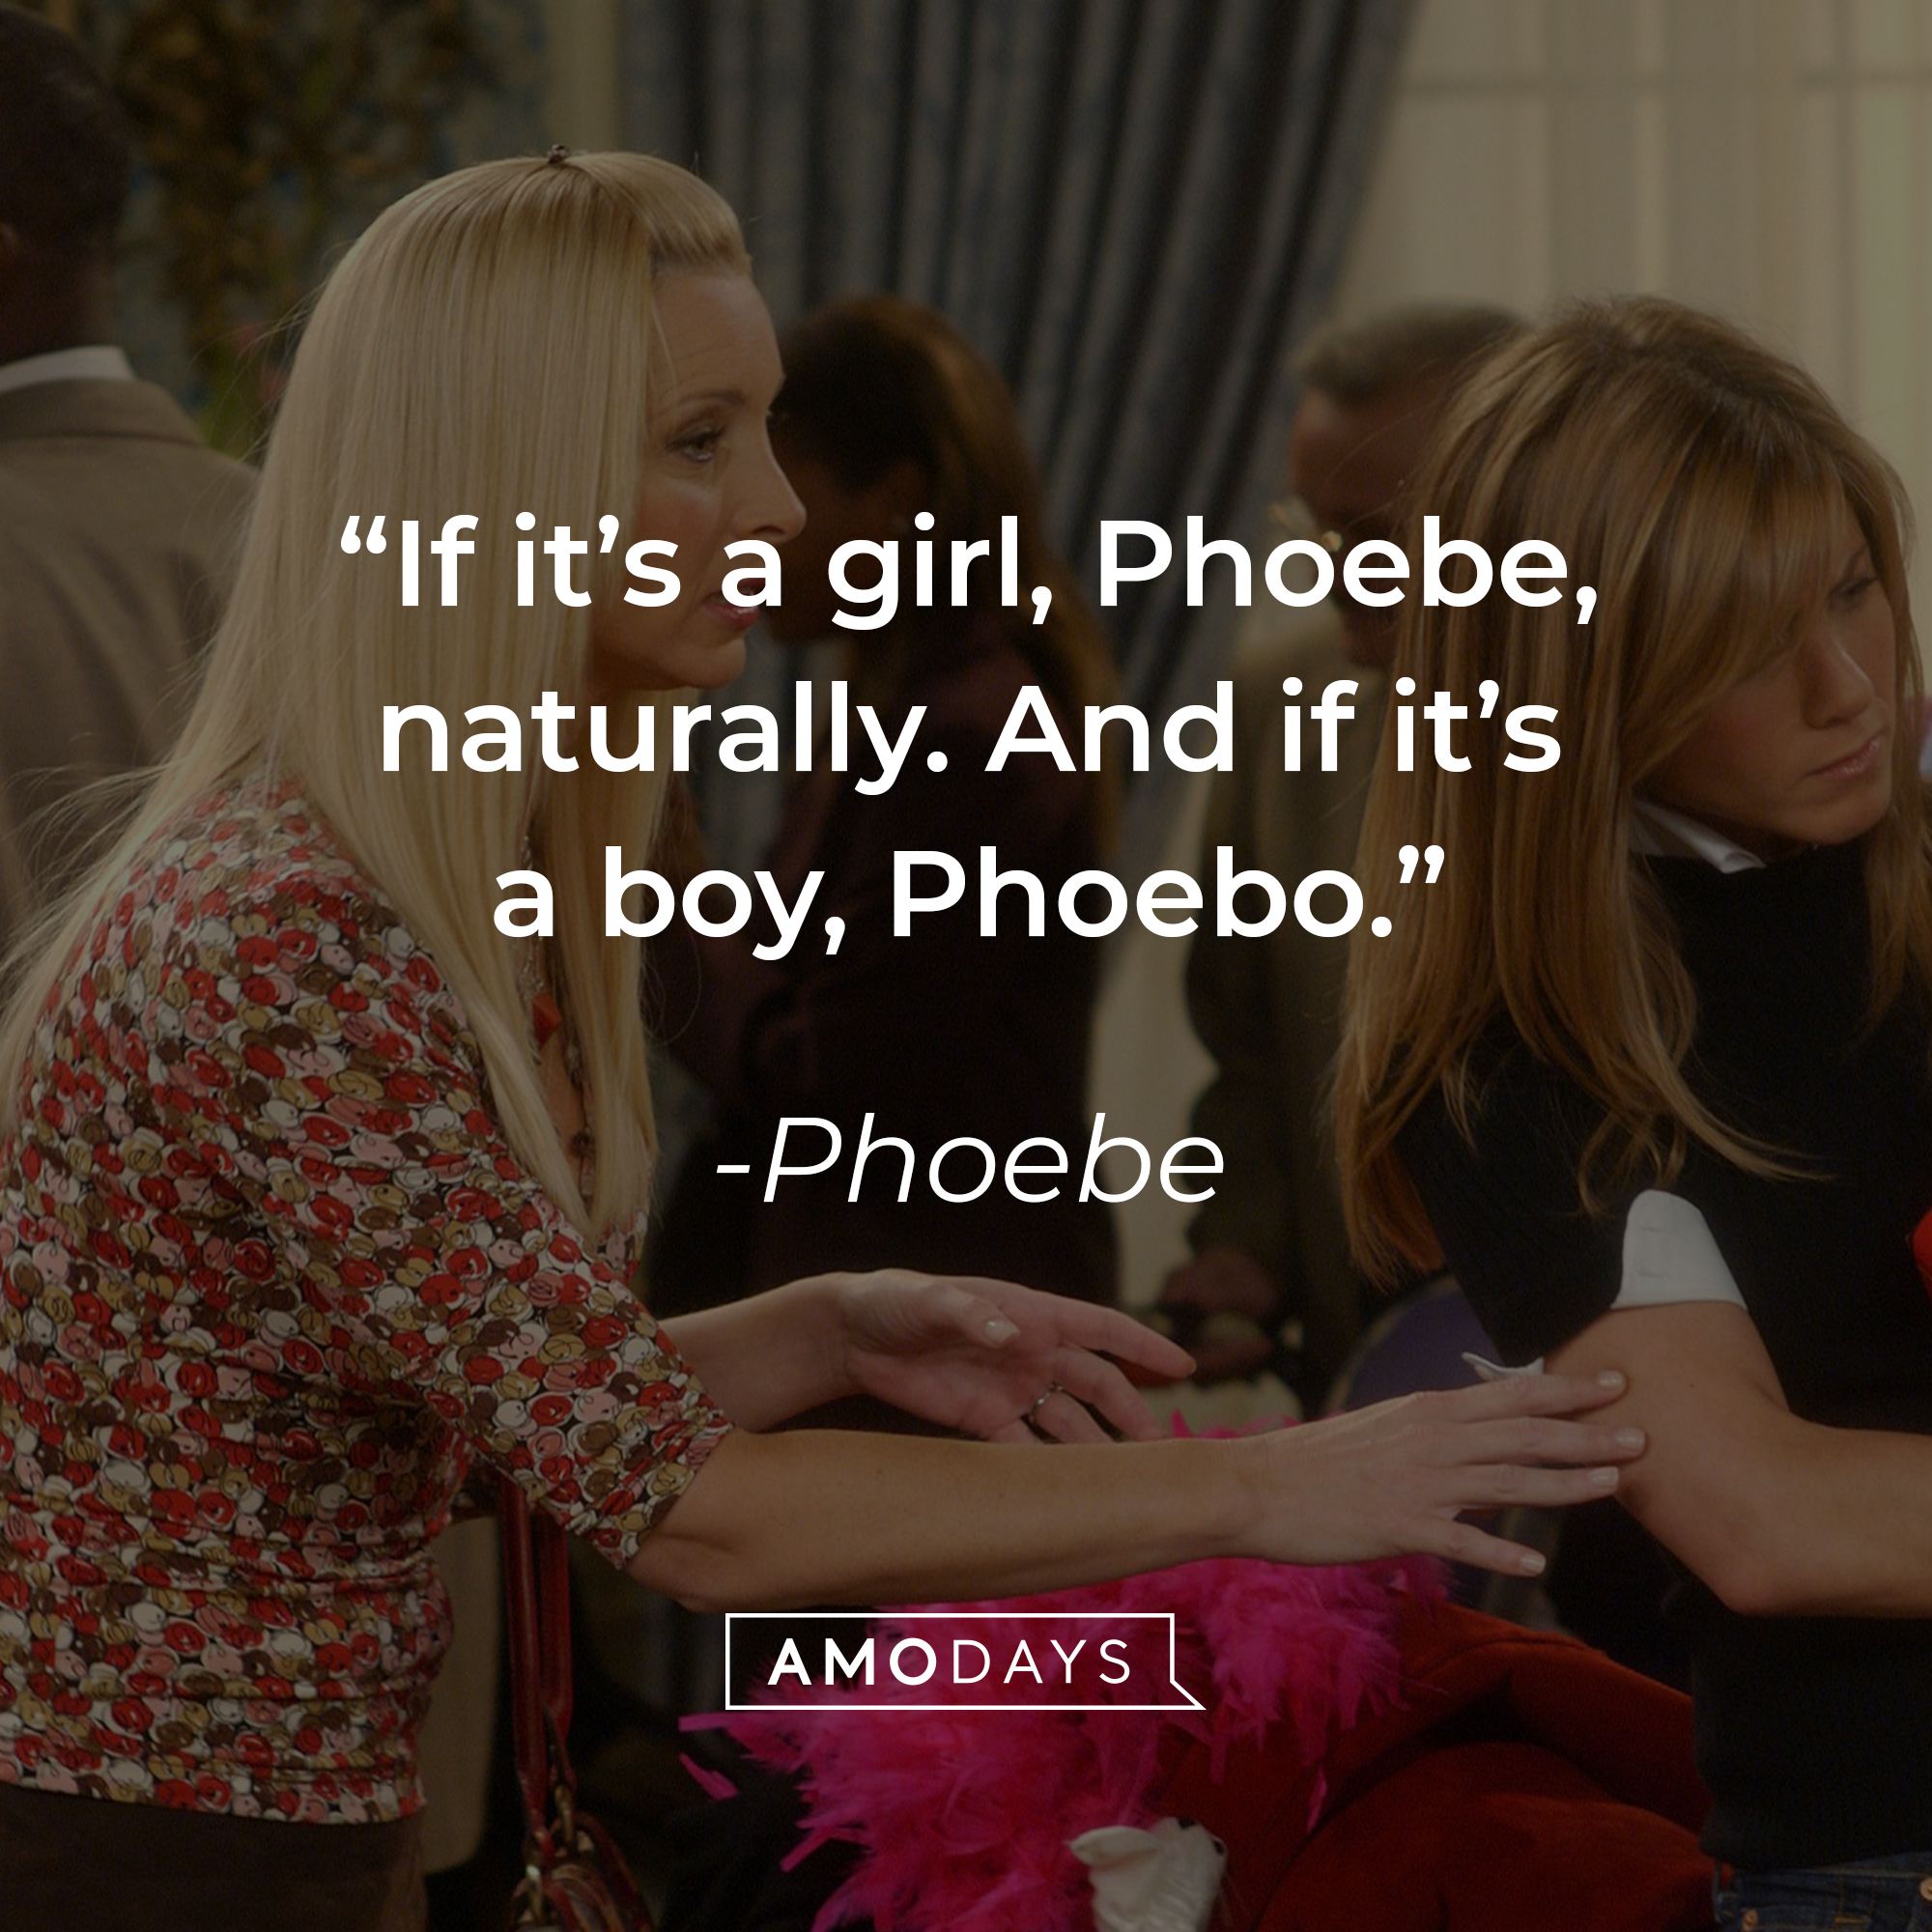 Phoebe's quote: "If it’s a girl, Phoebe, naturally. And if it’s a boy, Phoebo." | Source: Facebook.com/friends.tv